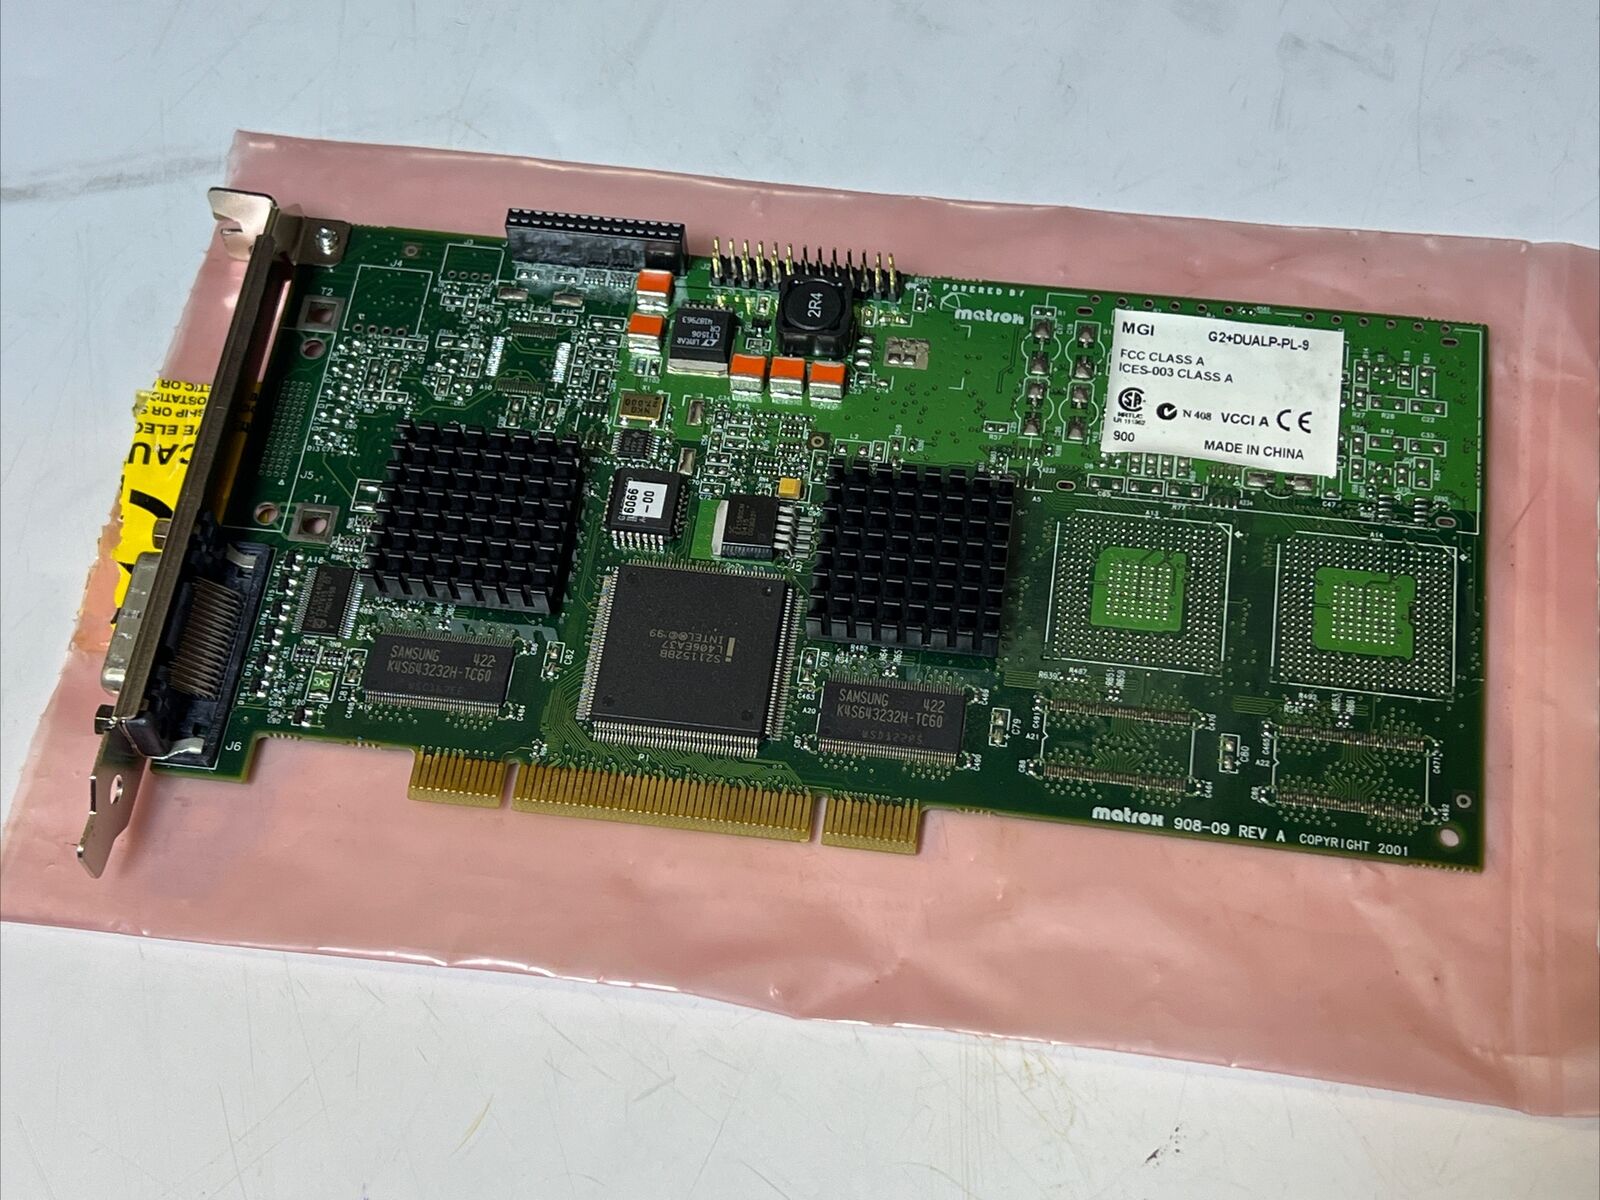 Matrox G200 G2+DUALP-PL-9 16 MB PCI Dual Output Video Adaptor Card Working Pull